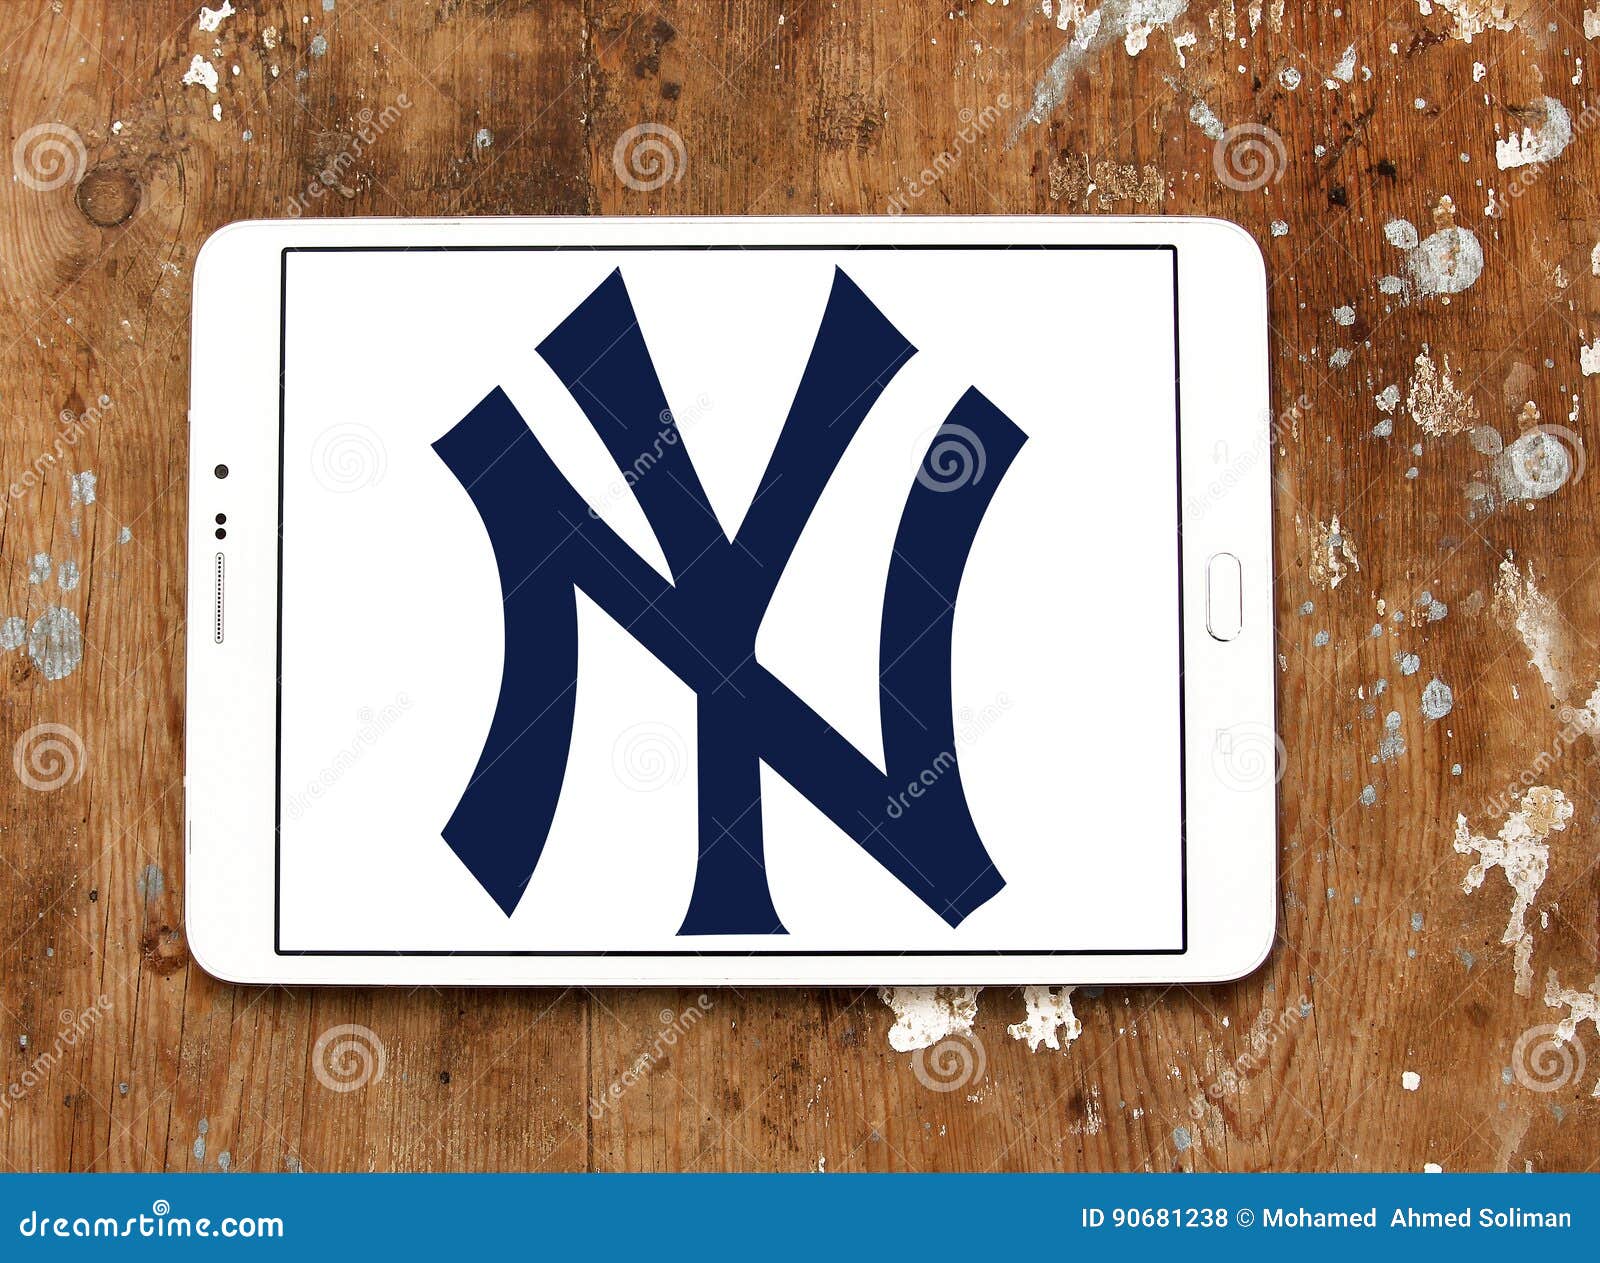 Two Yankees Baseball Players Standing Together On A Field Background,  Pictures Of The Yankees Background Image And Wallpaper for Free Download